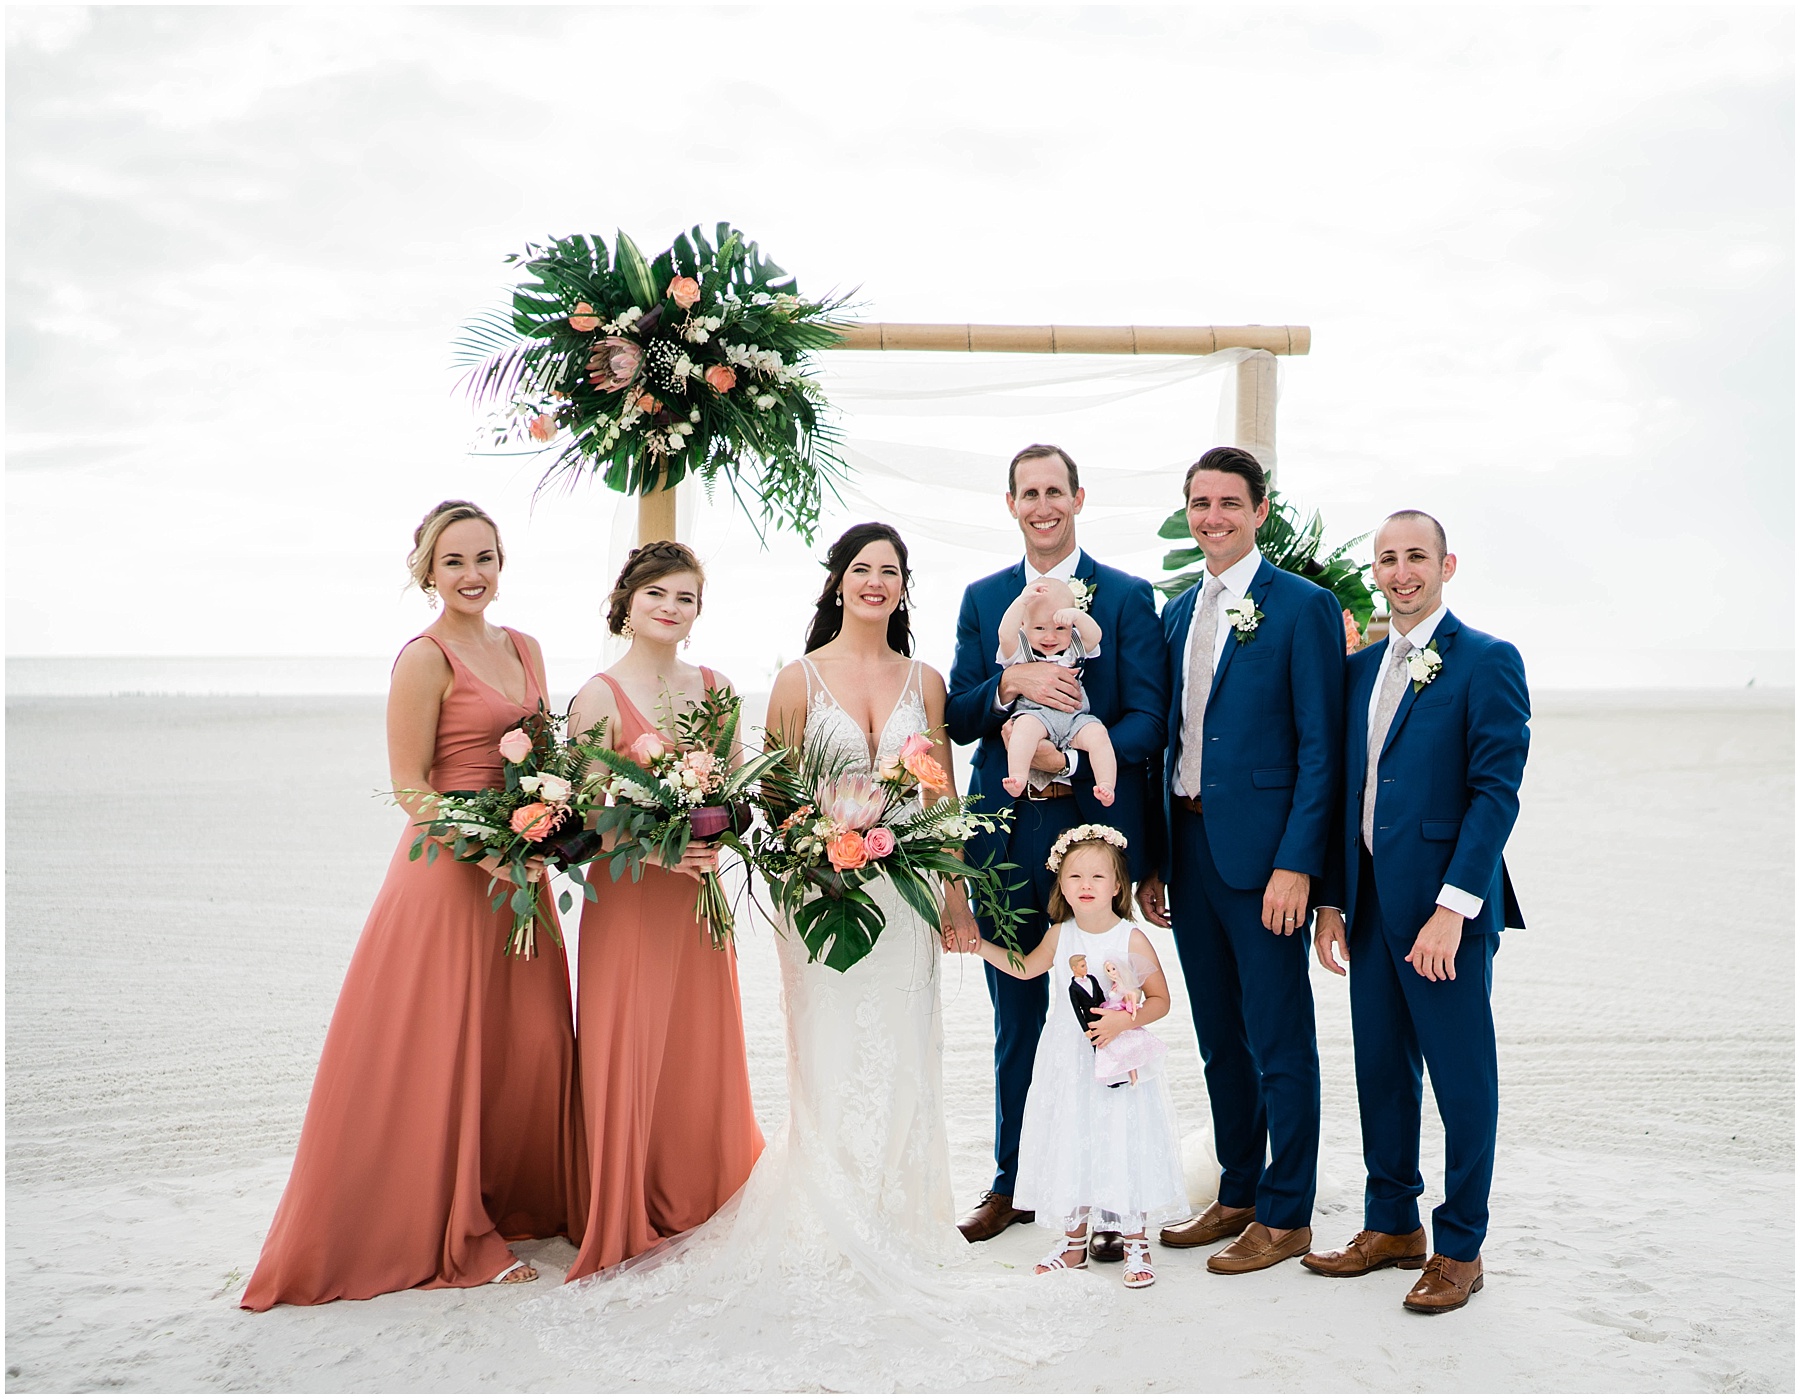 Bridal party smiles on wedding day at JW Marriott Marco Island in Florida